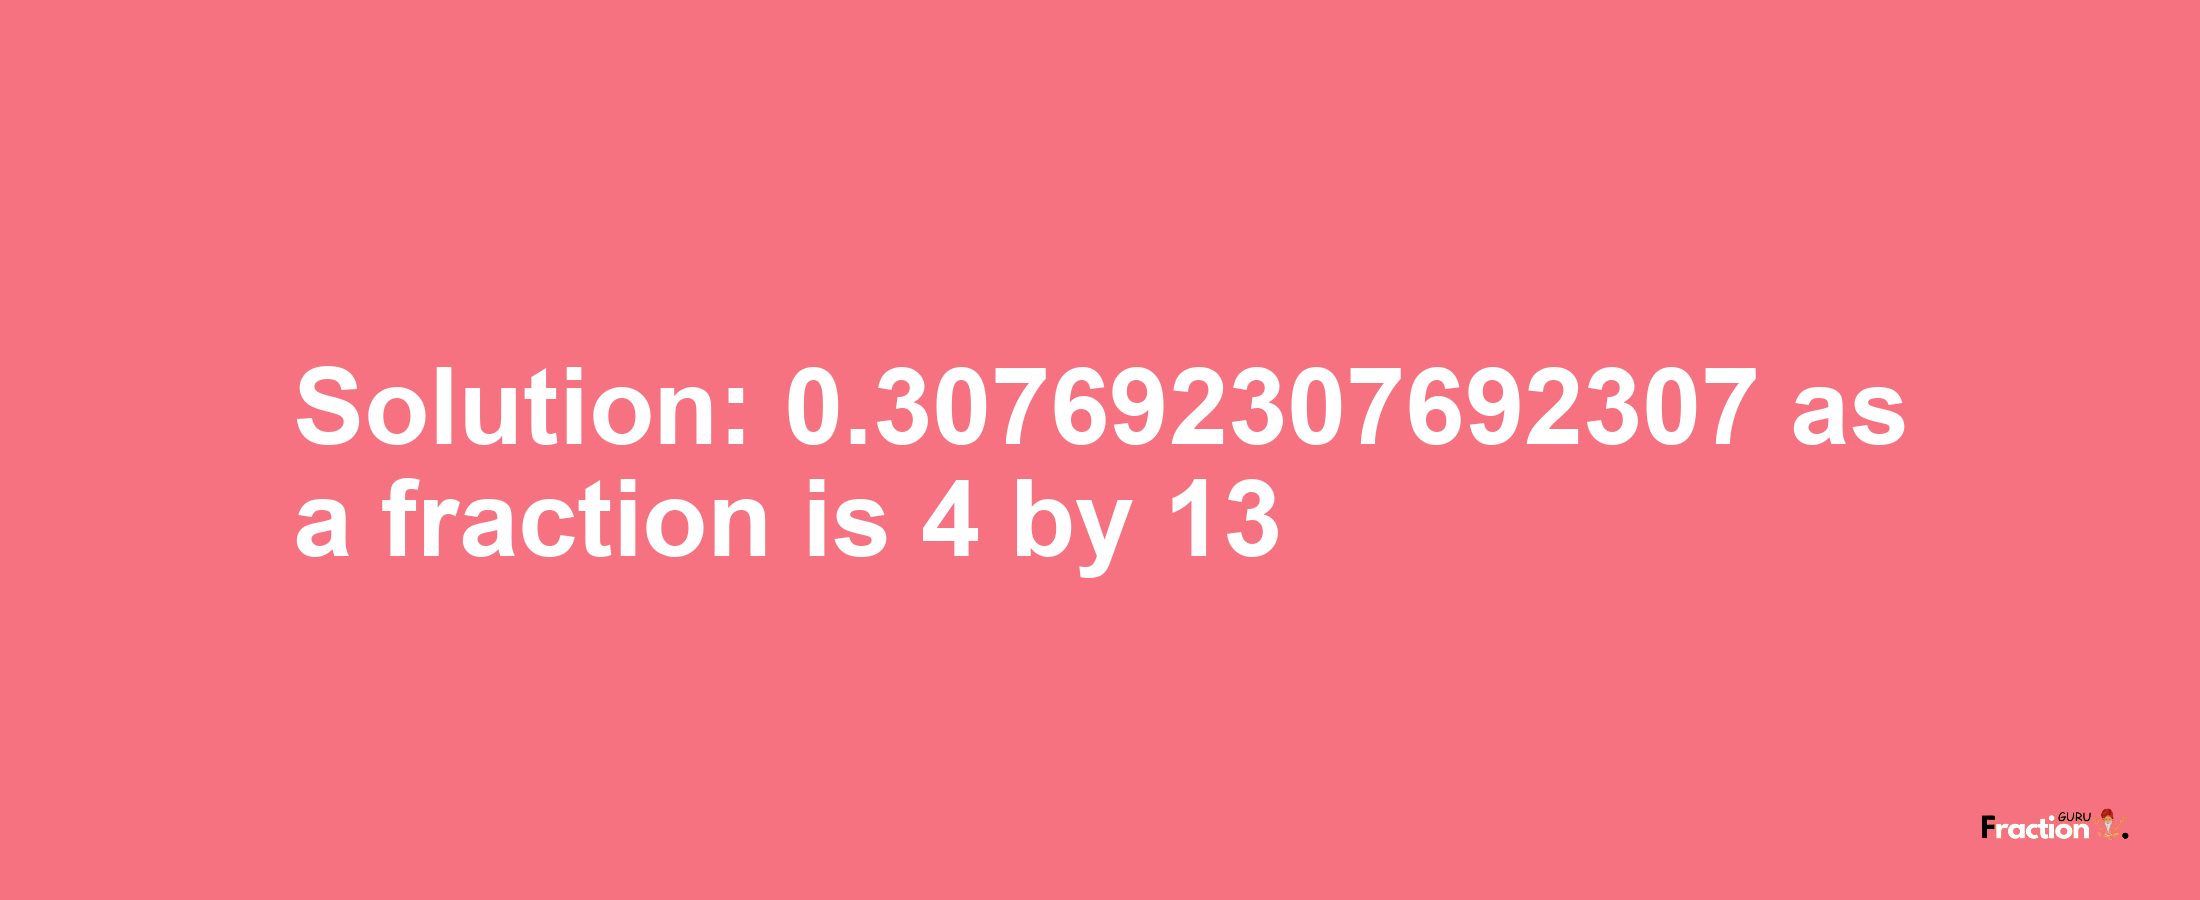 Solution:0.307692307692307 as a fraction is 4/13